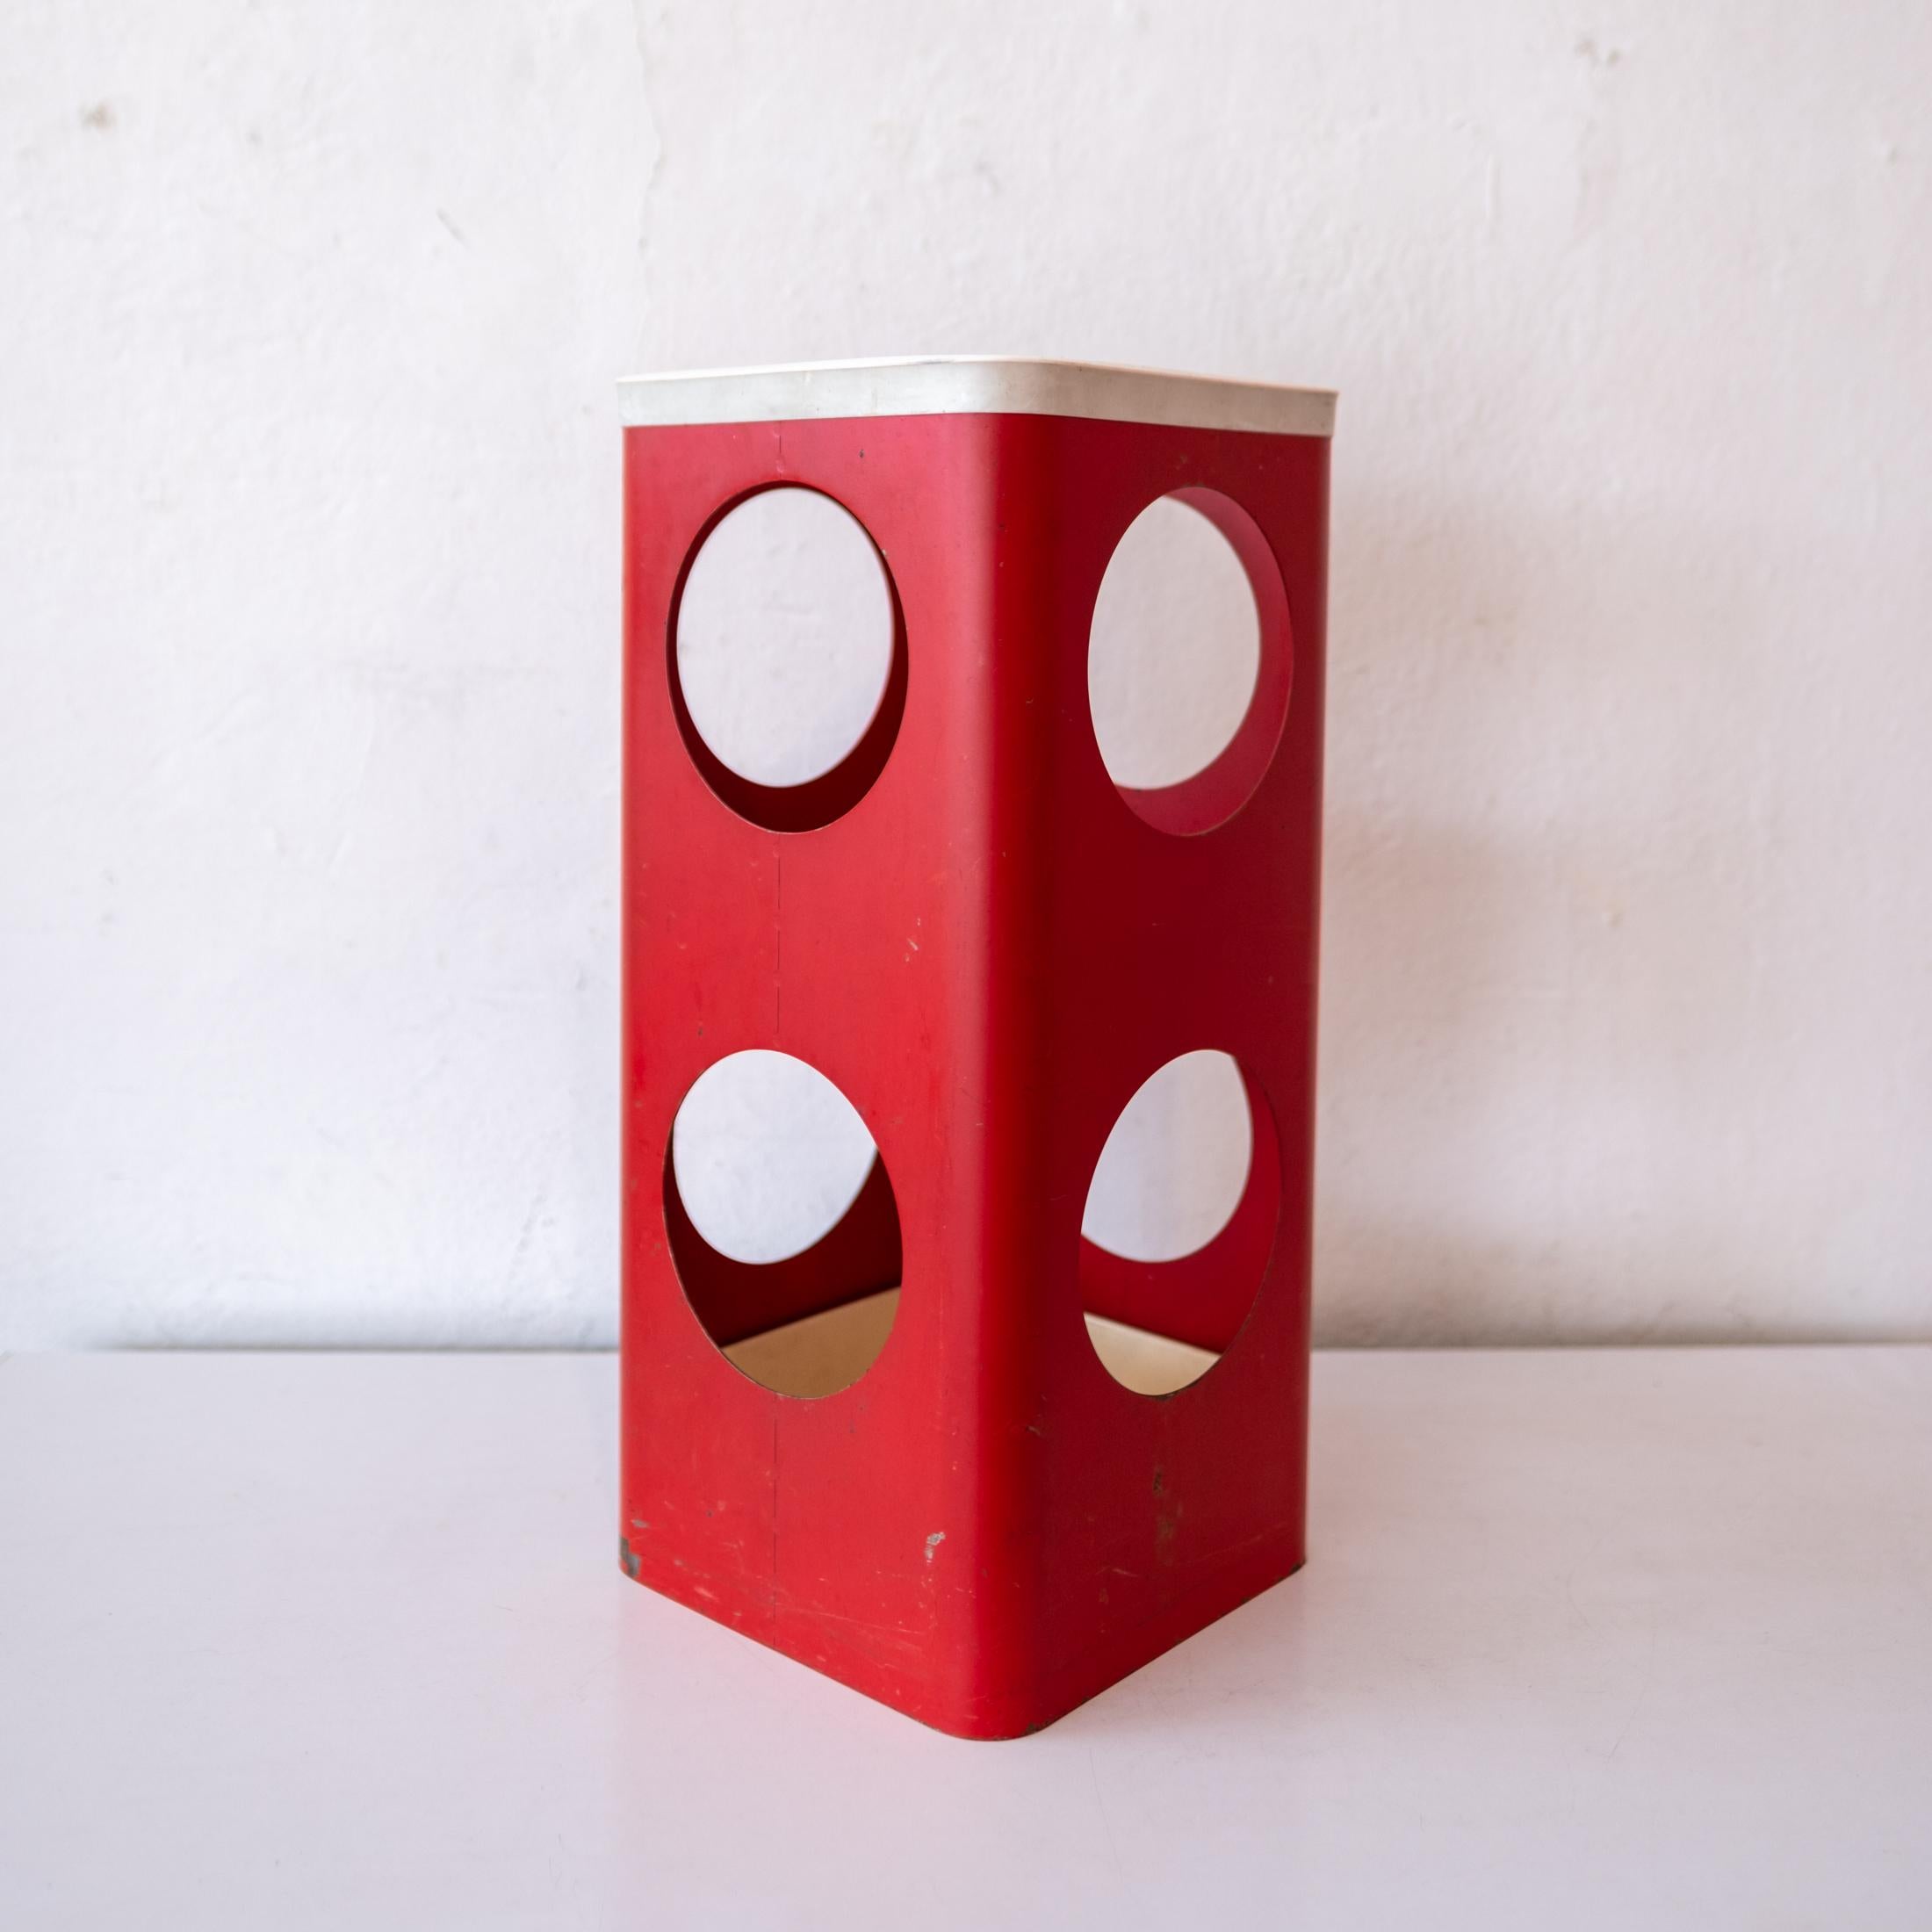 Perforated metal bauhaus umbrella stand. Original red enamel over metal. A great design with a plastic water catcher on the bottom.